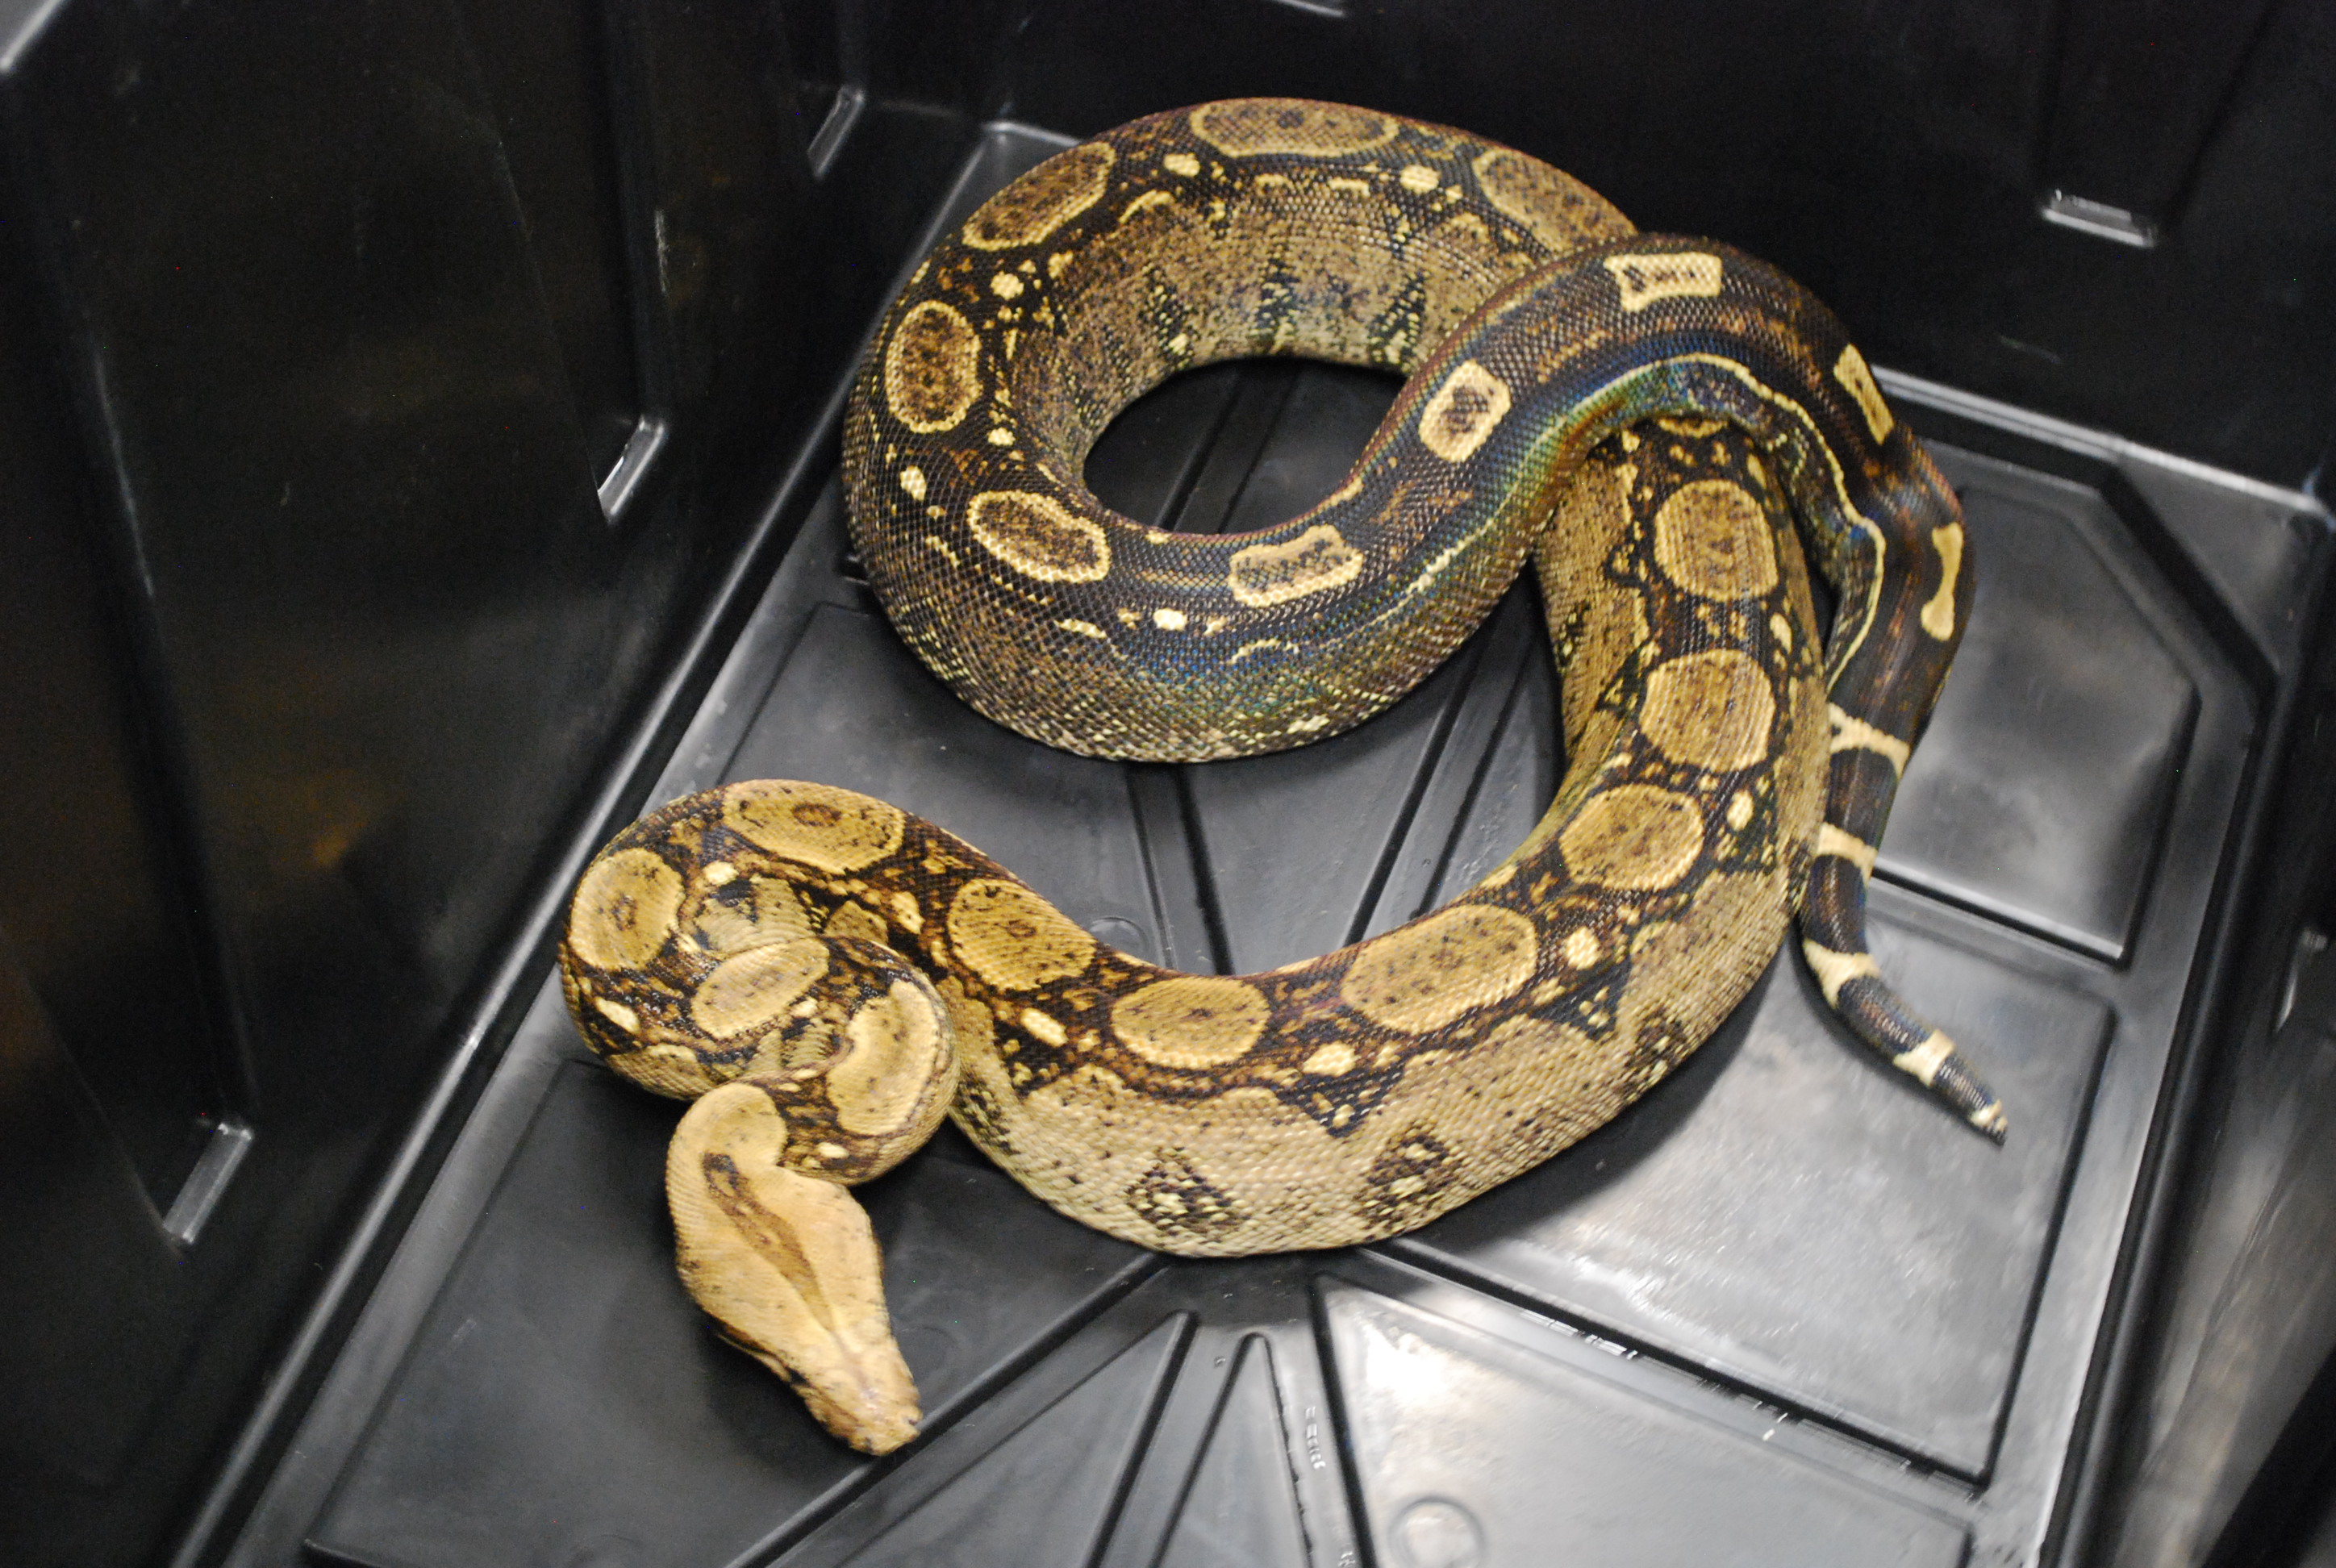 Square Tail Boa Constrictor by R And R Boas